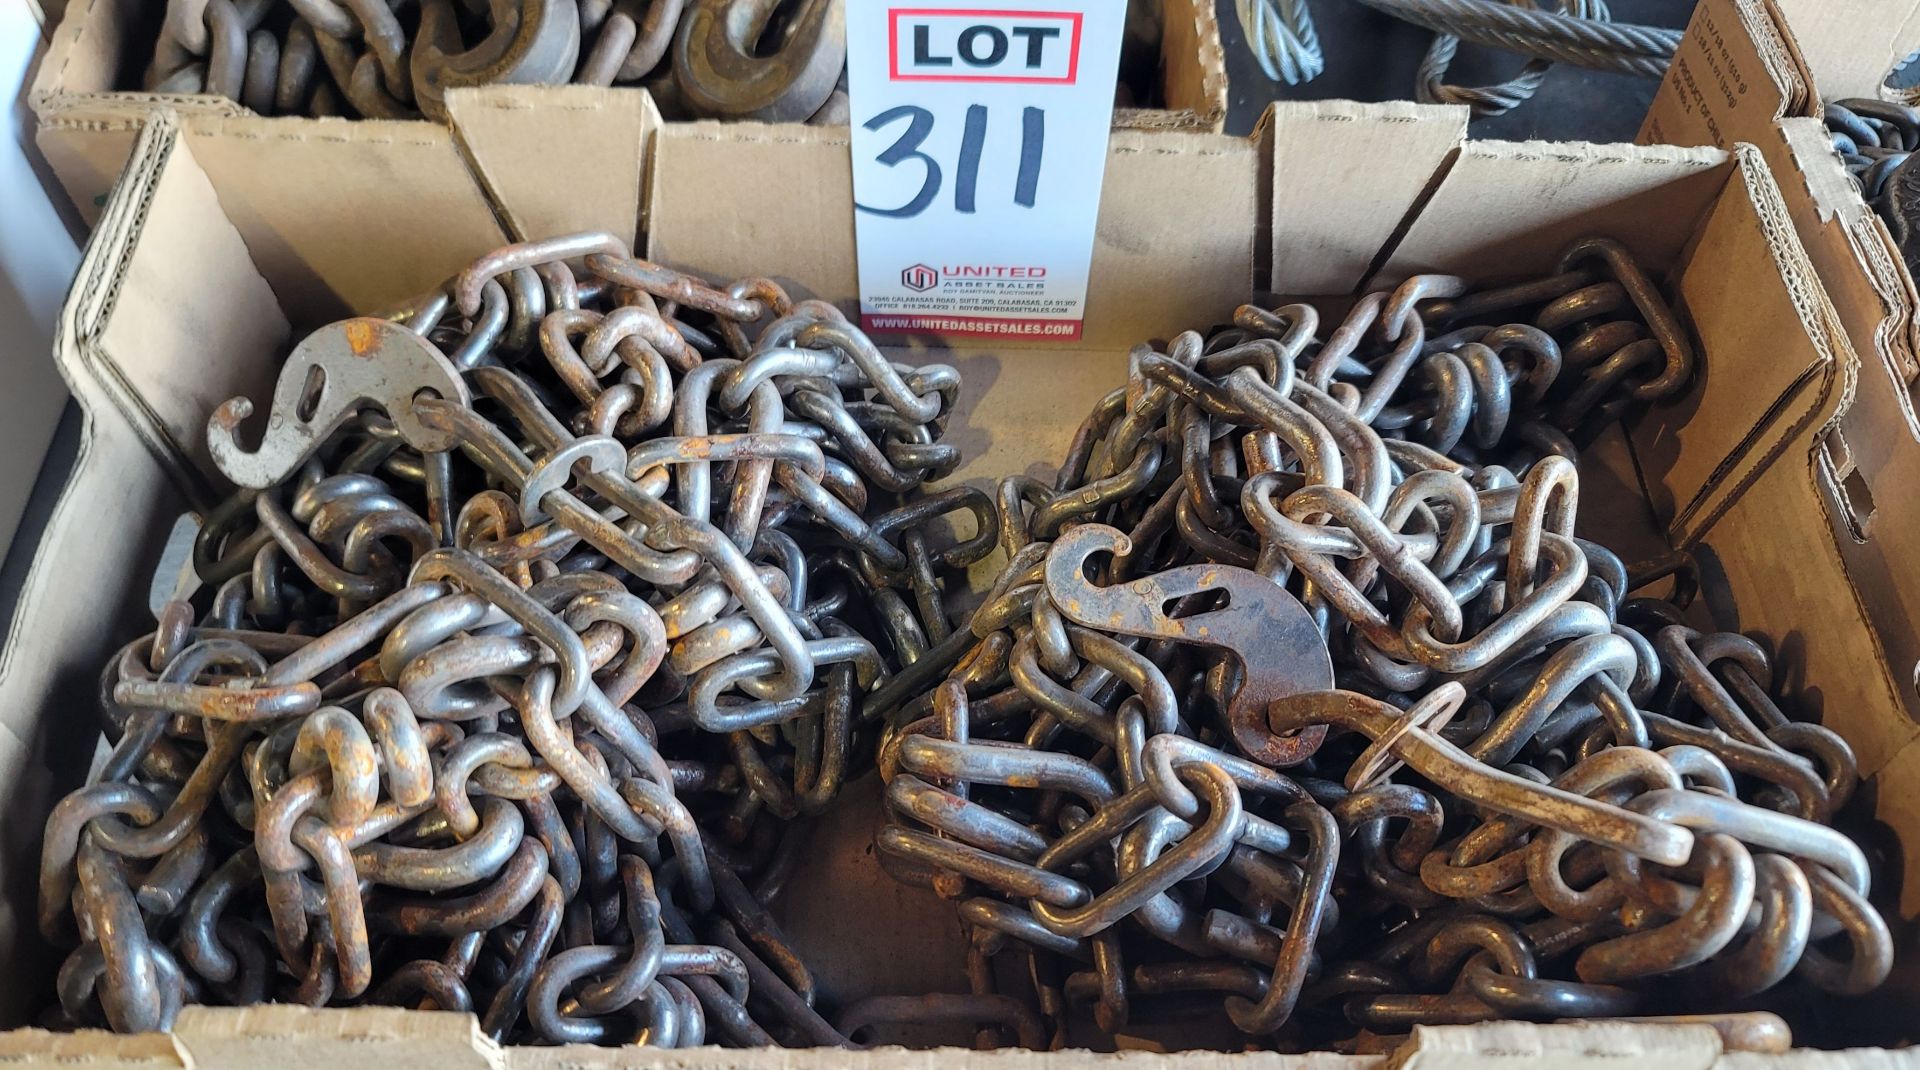 LOT - (2) TIRE CHAINS, FOR A FORD F250 LATE MODEL PICKUP